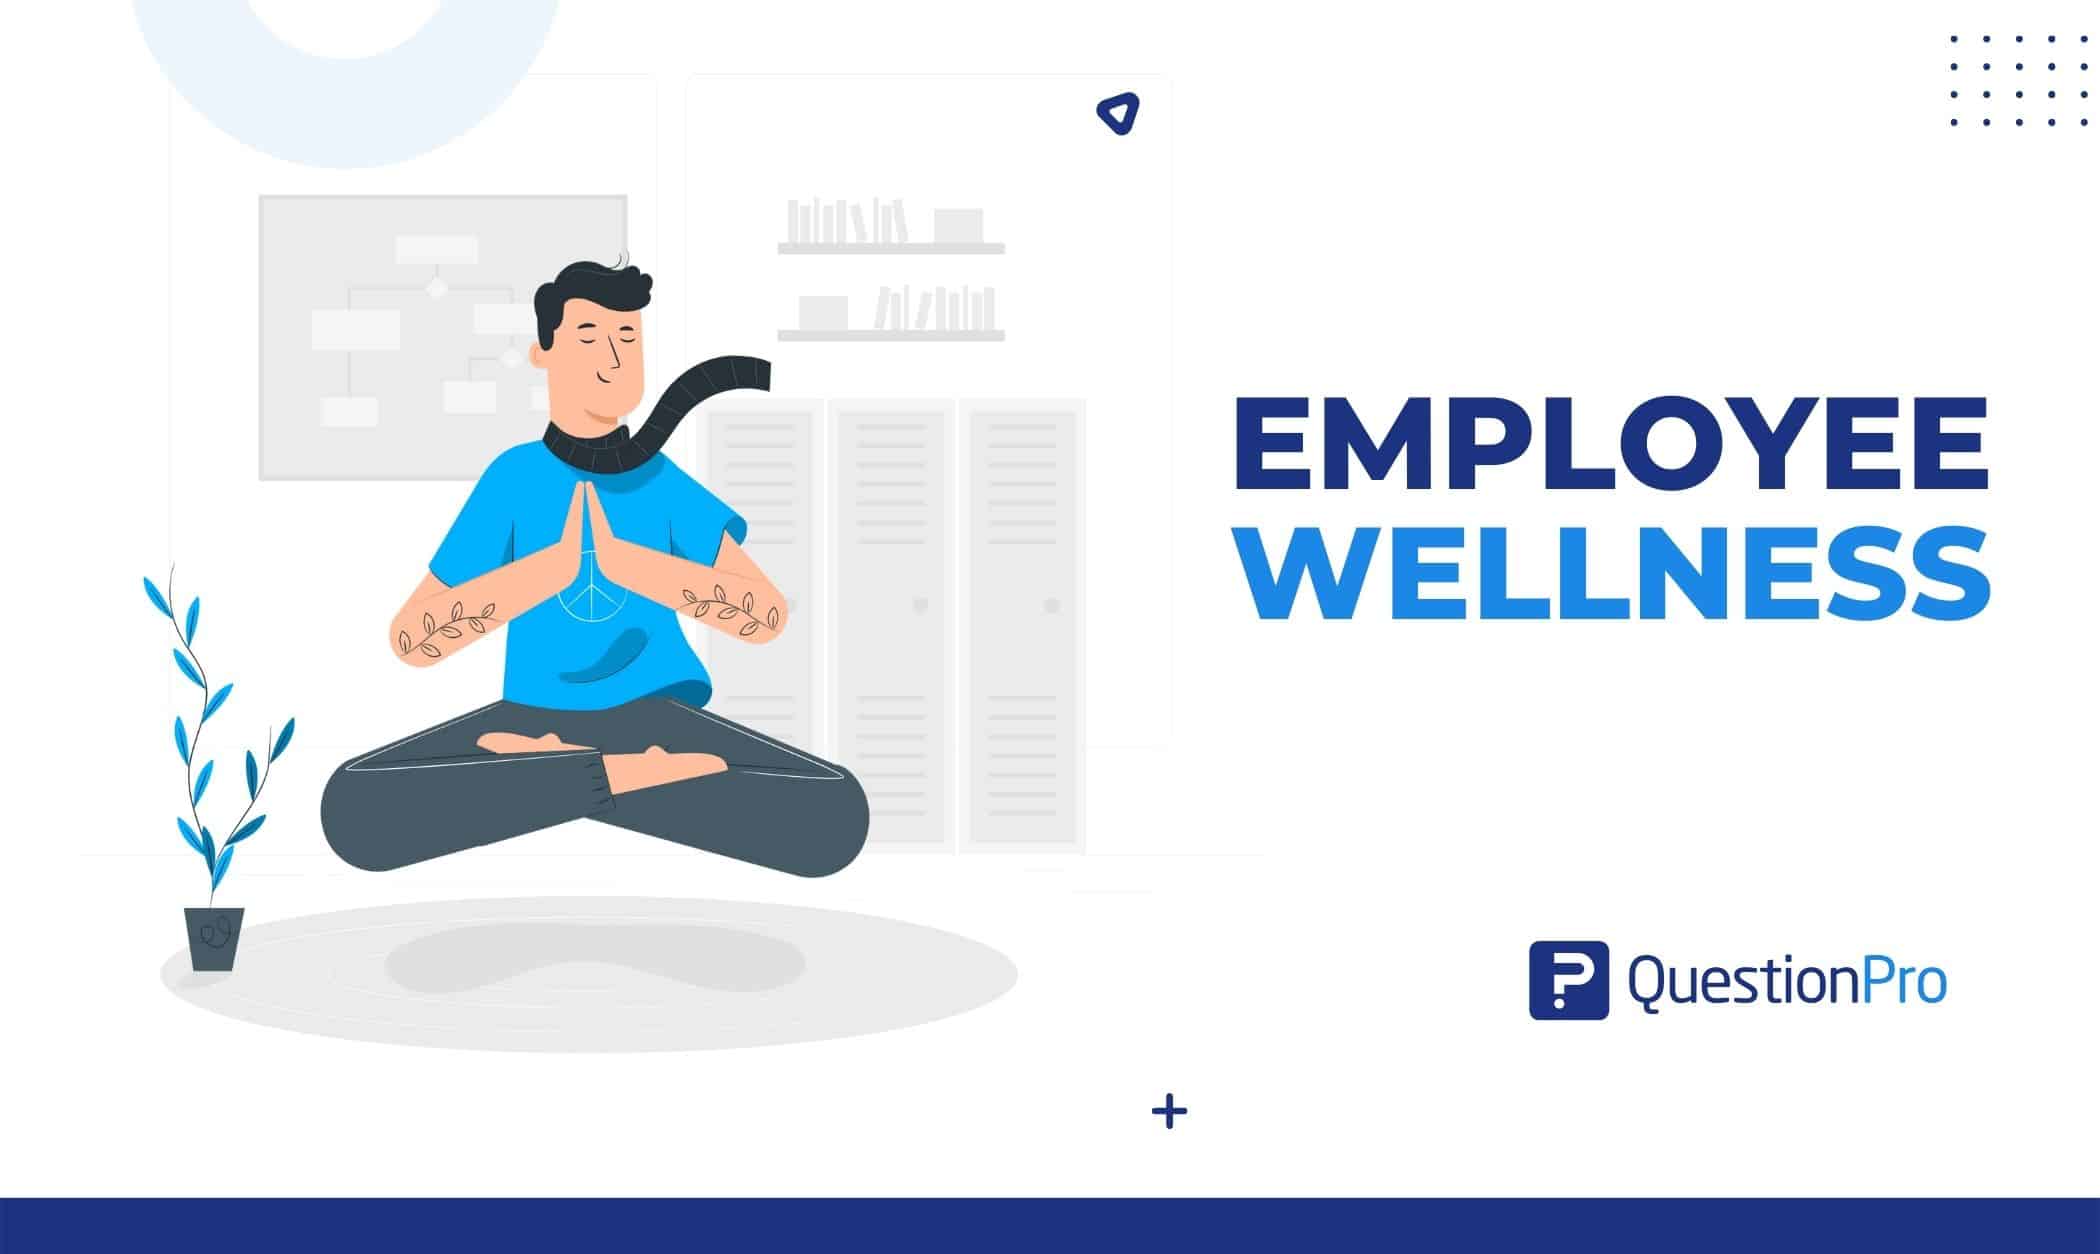 Employee wellness includes activities and programs that promote employee health. Prioritizing well-being reduces organizational burnout.